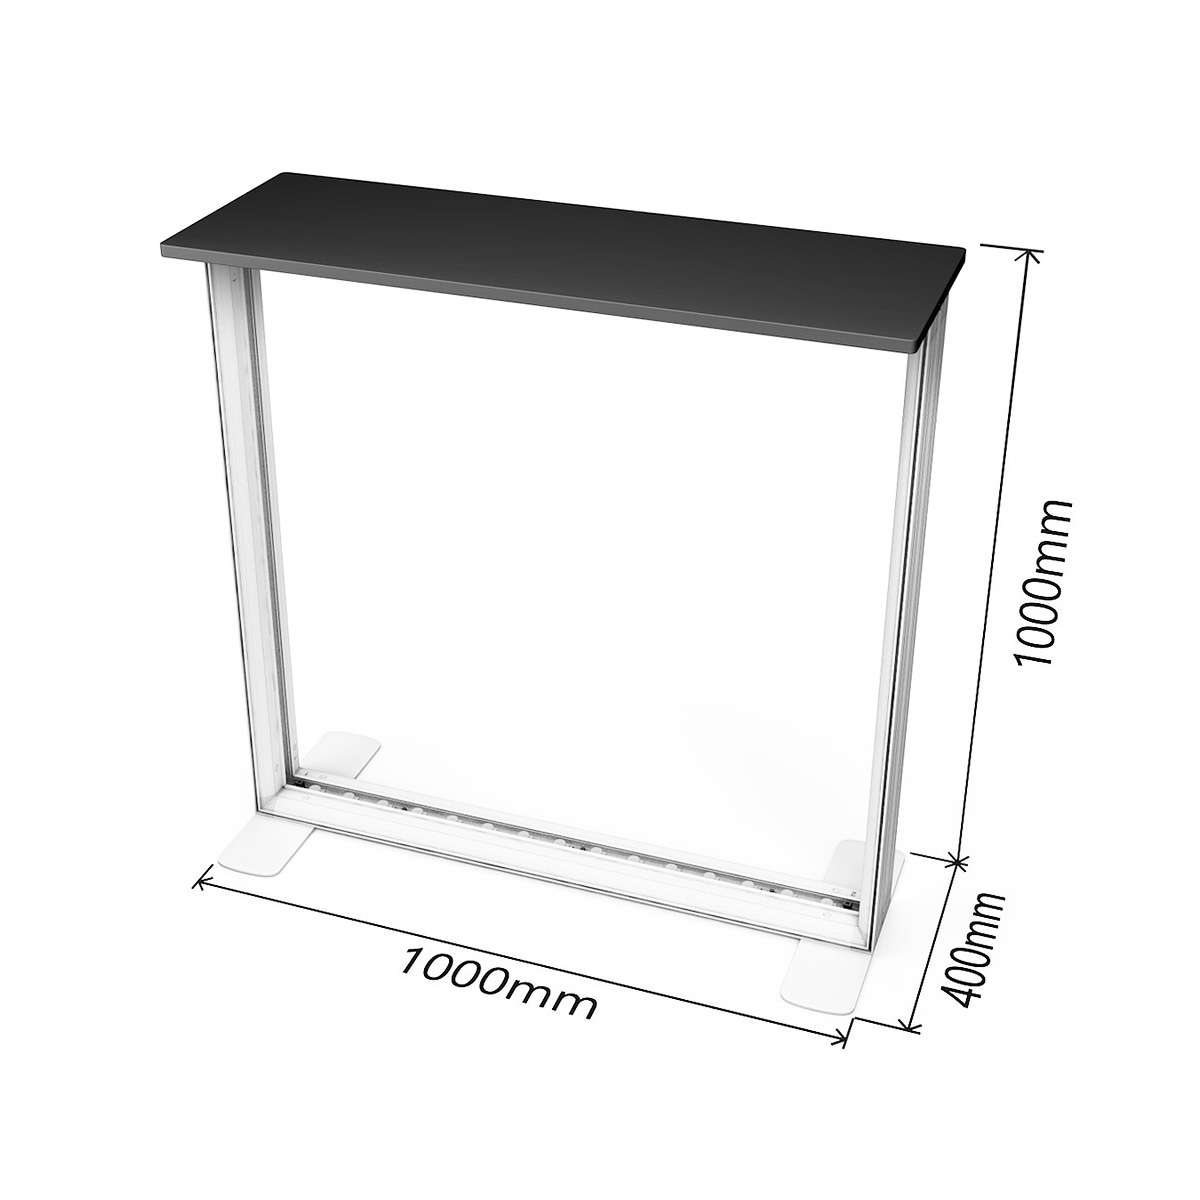 FABRILUX® LED Exhibition Counter Lightbox 1m x 1m Dimensions